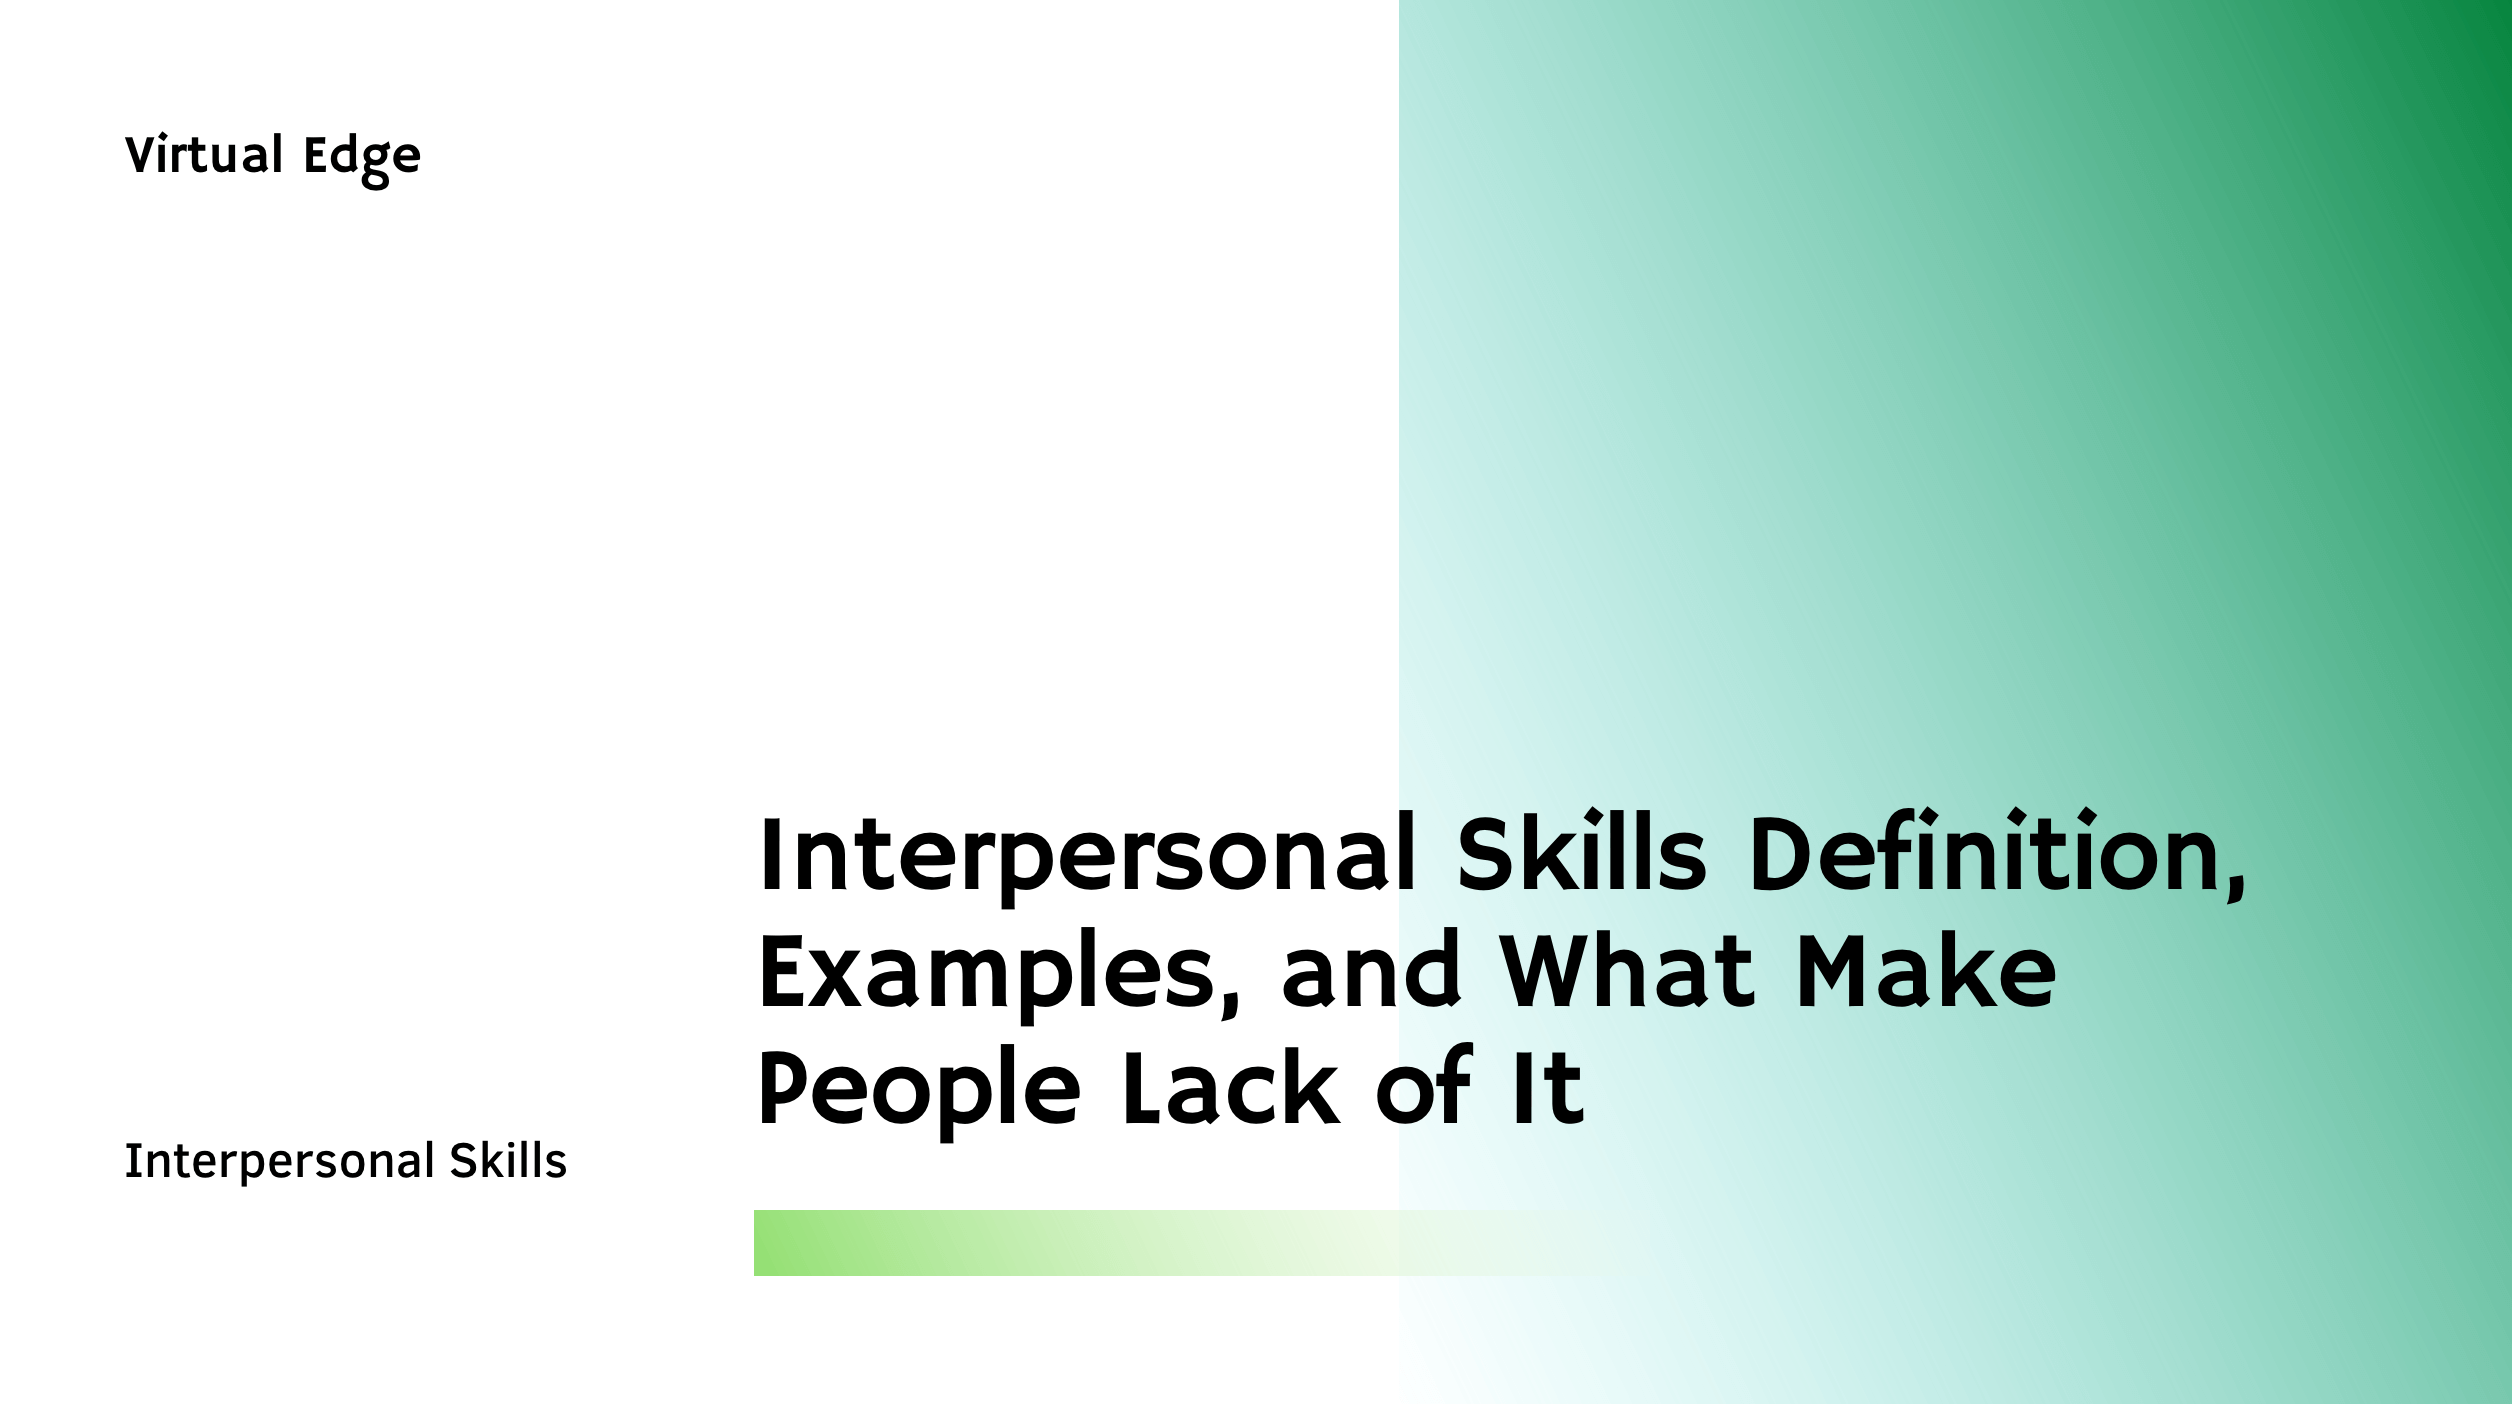 Interpersonal Skills Definition, Examples, and What Make People Lack of It